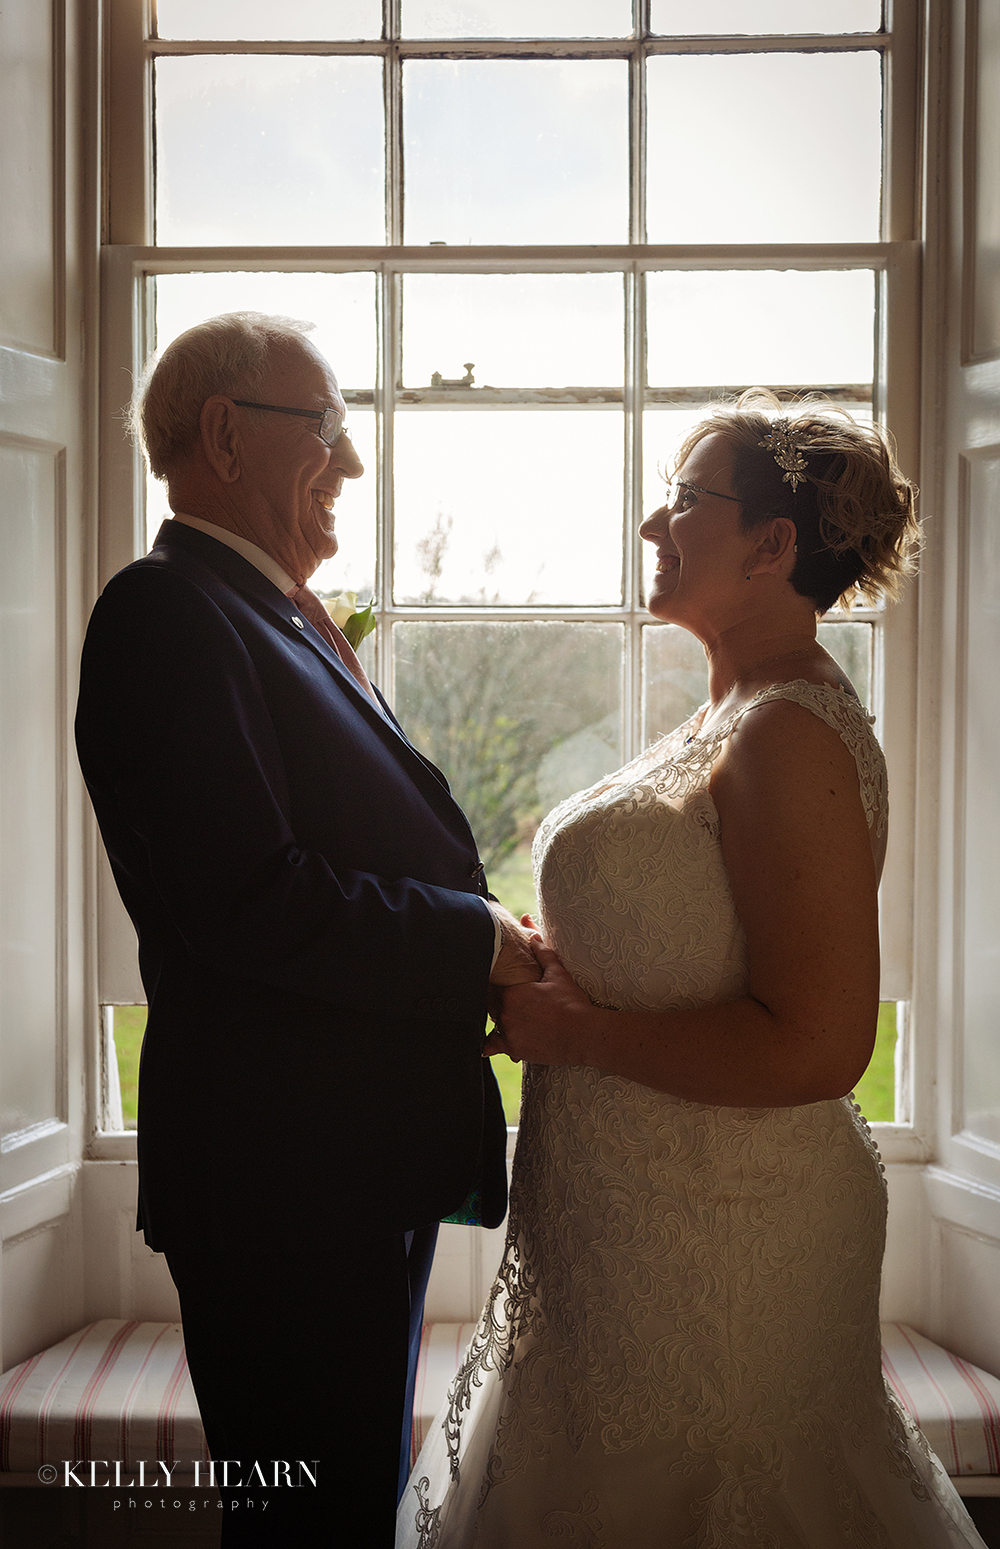 LEW_bride-and-father-by-window.jpg#asset:2769